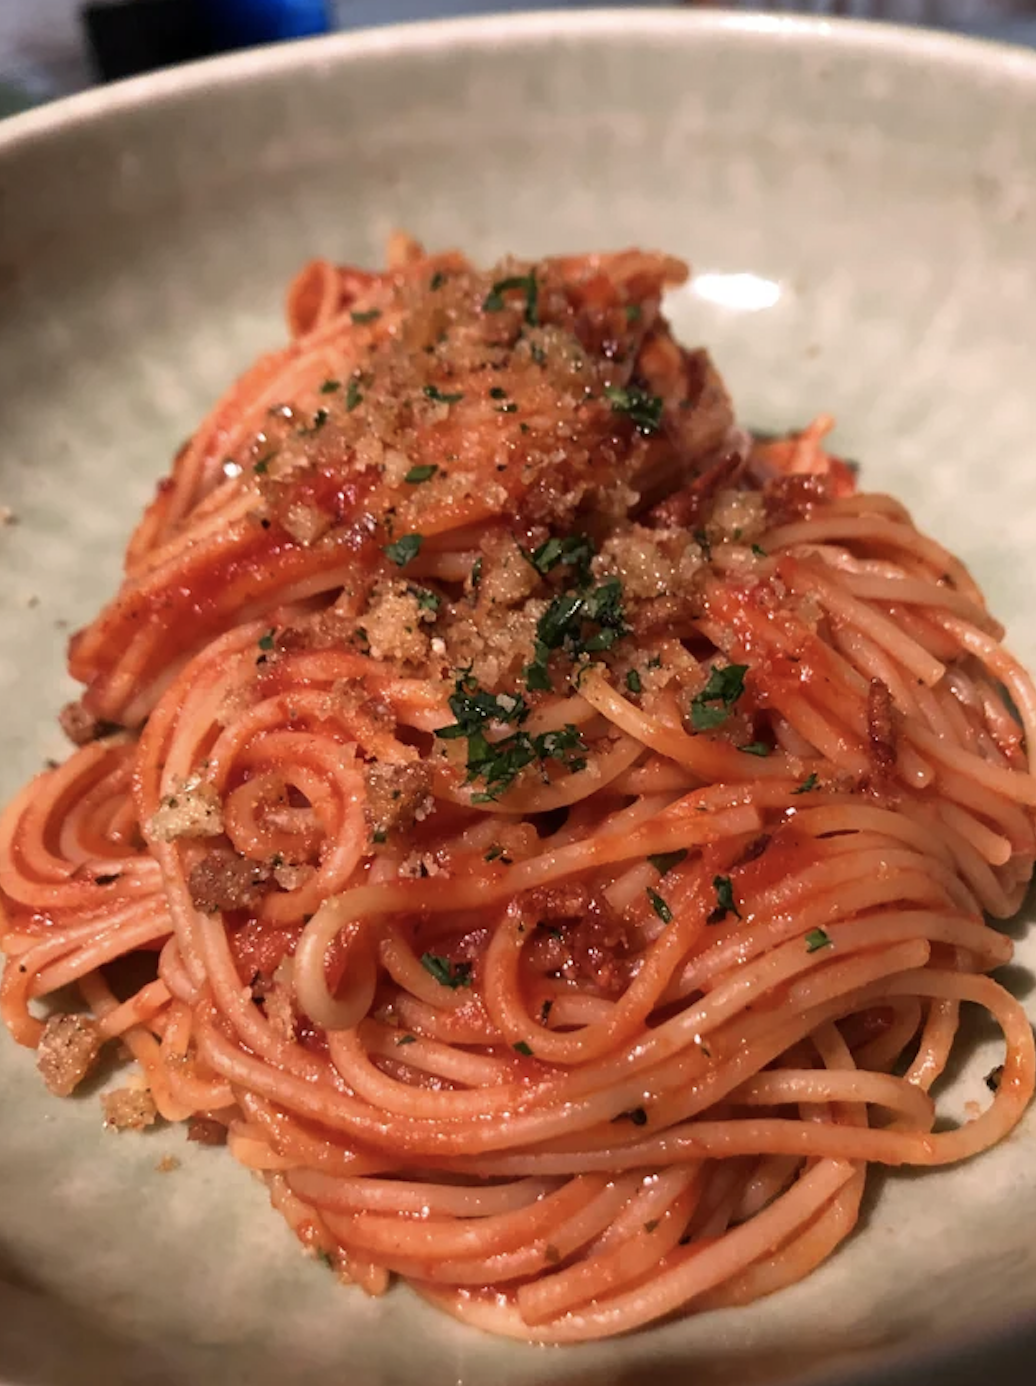 A plate of spaghetti with tomato sauce and a sprinkling of herbs and breadcrumbs